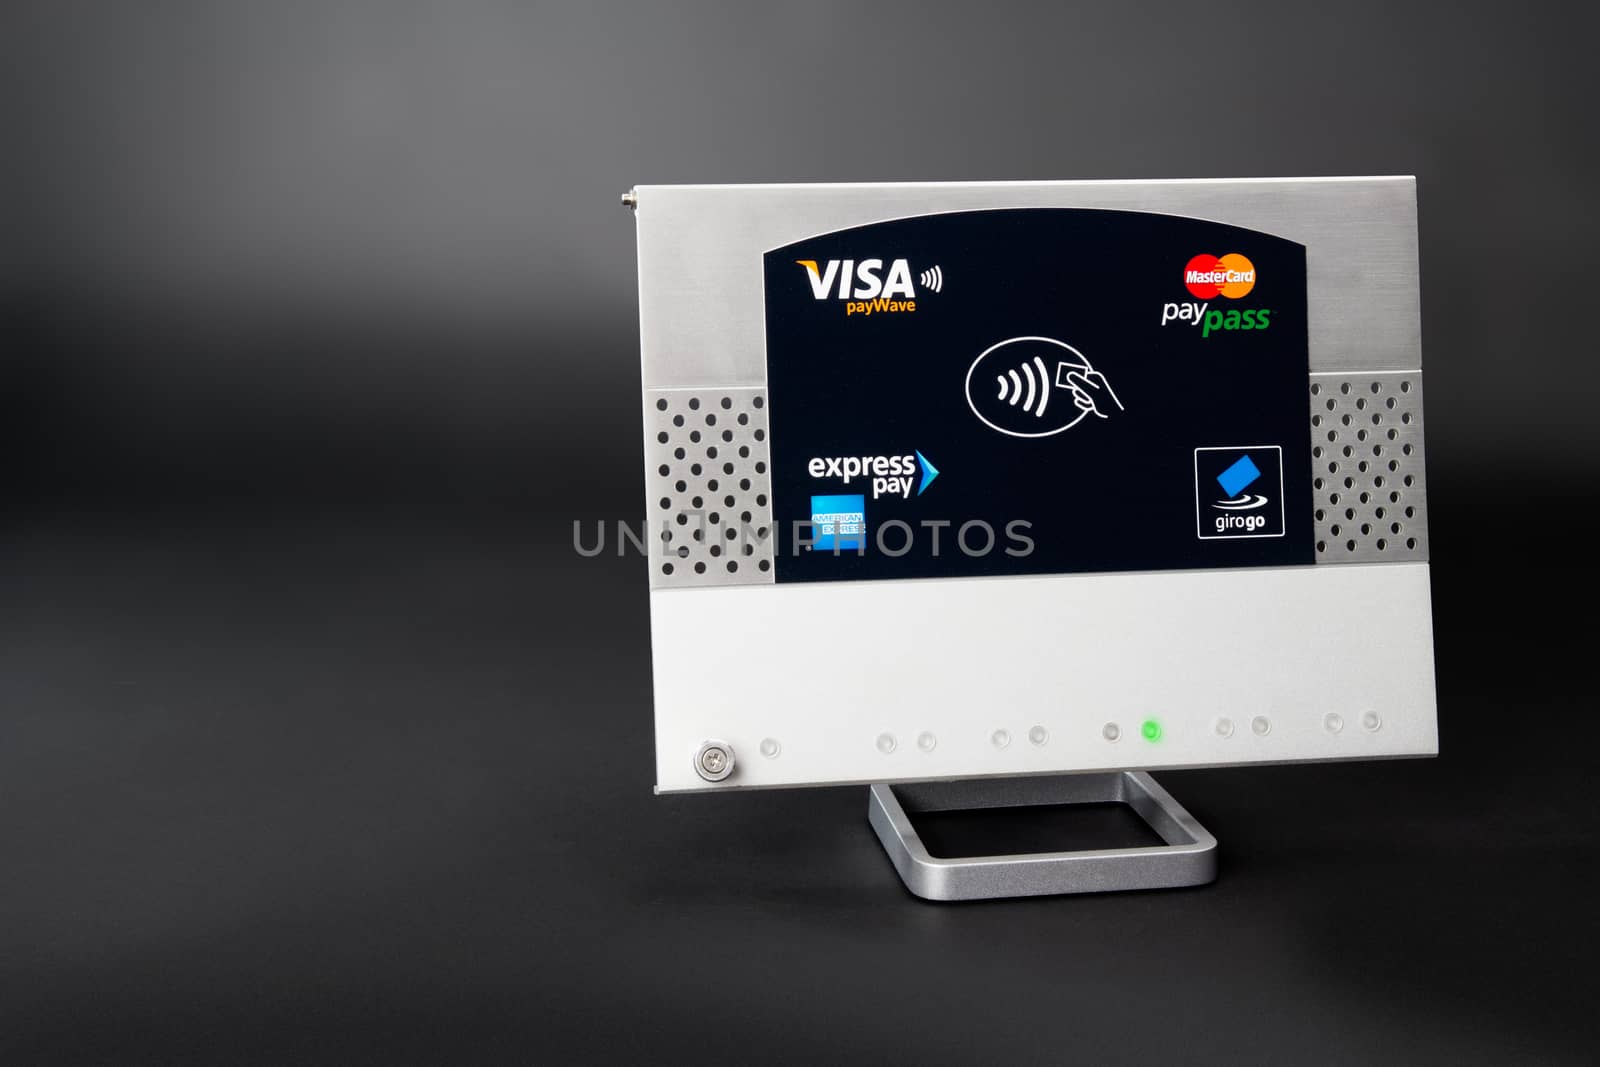 NFC - Near field communication / contactless payment by aa-w